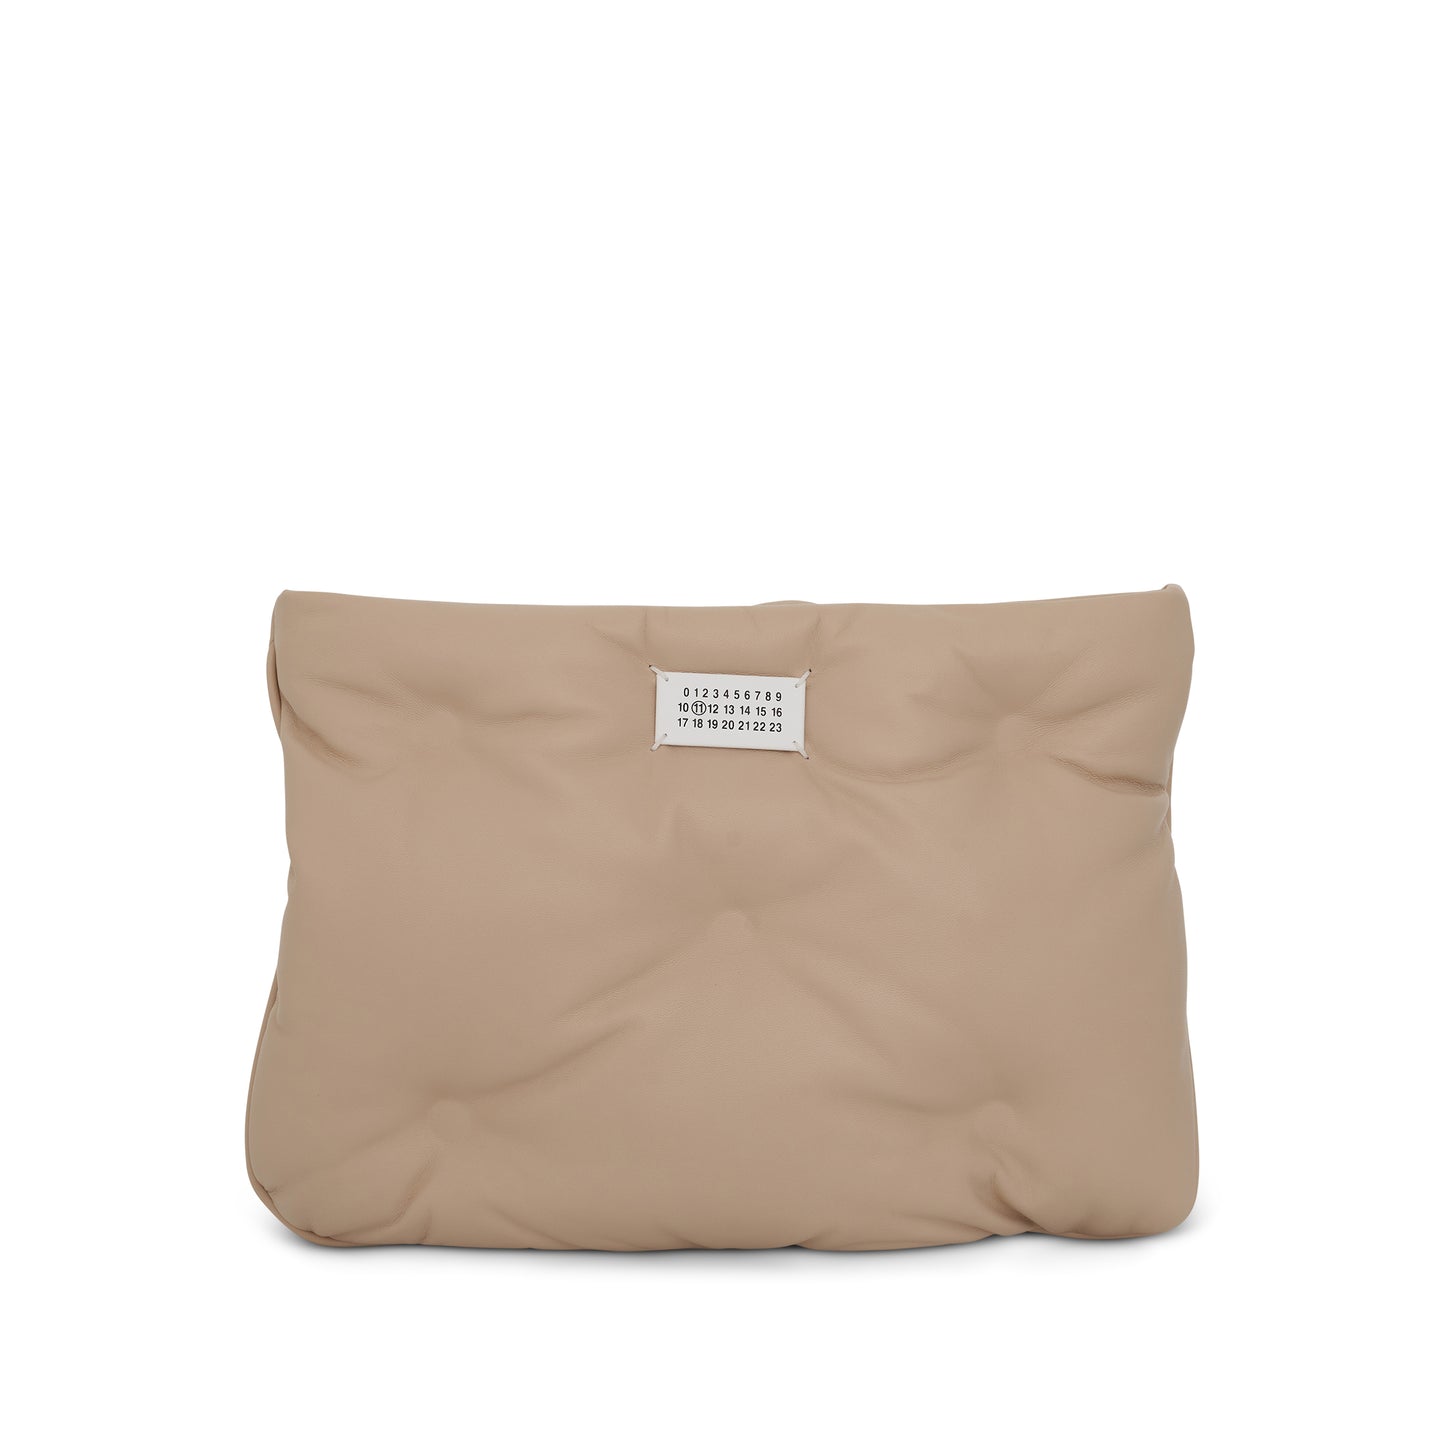 Glam Slam Leather Clutch in Cashmere